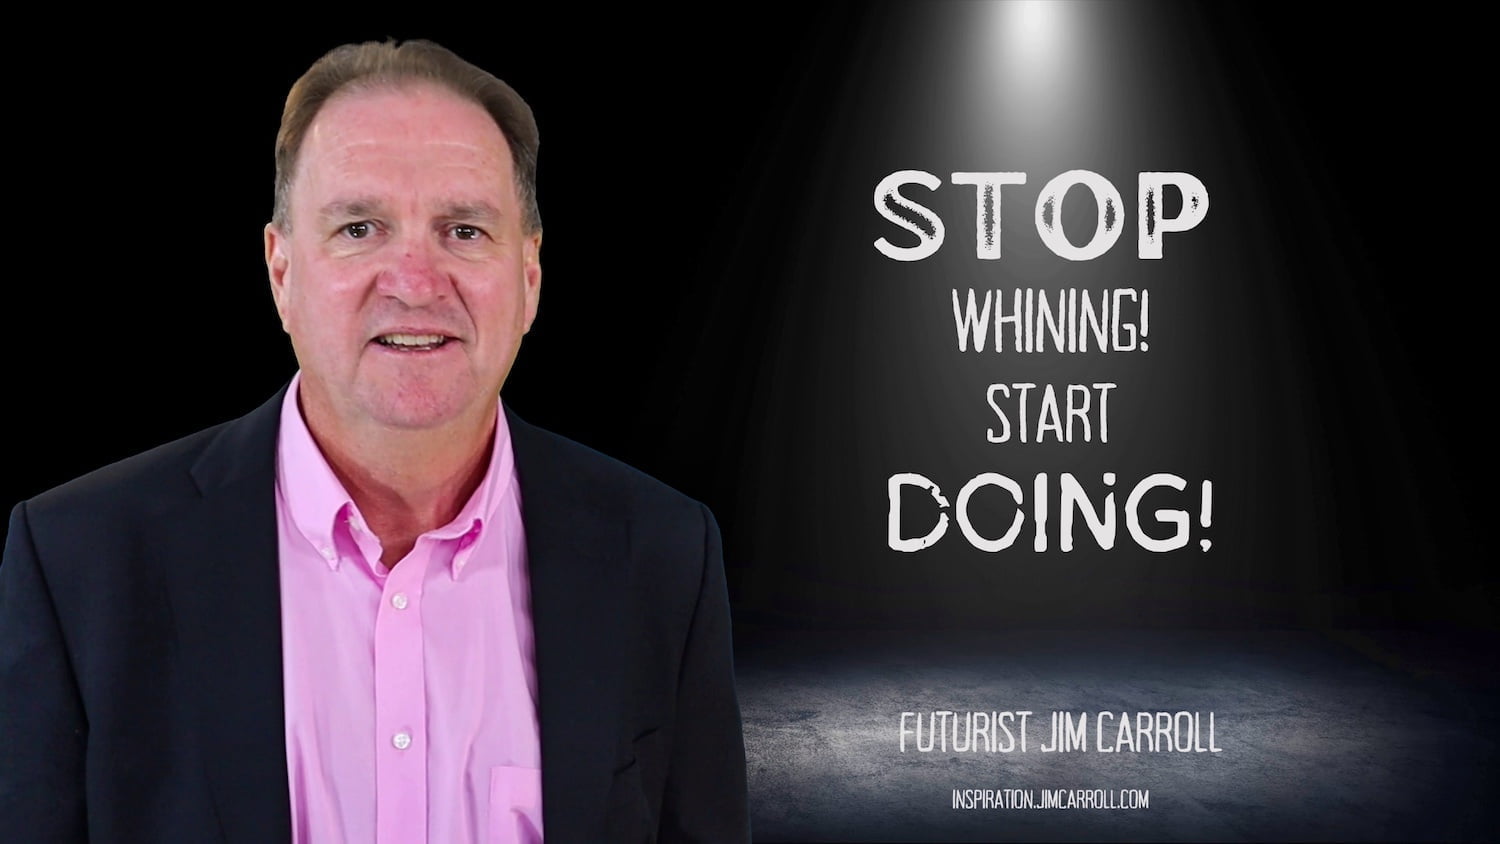 Daily Inspiration: "Stop whining! Start doing!"